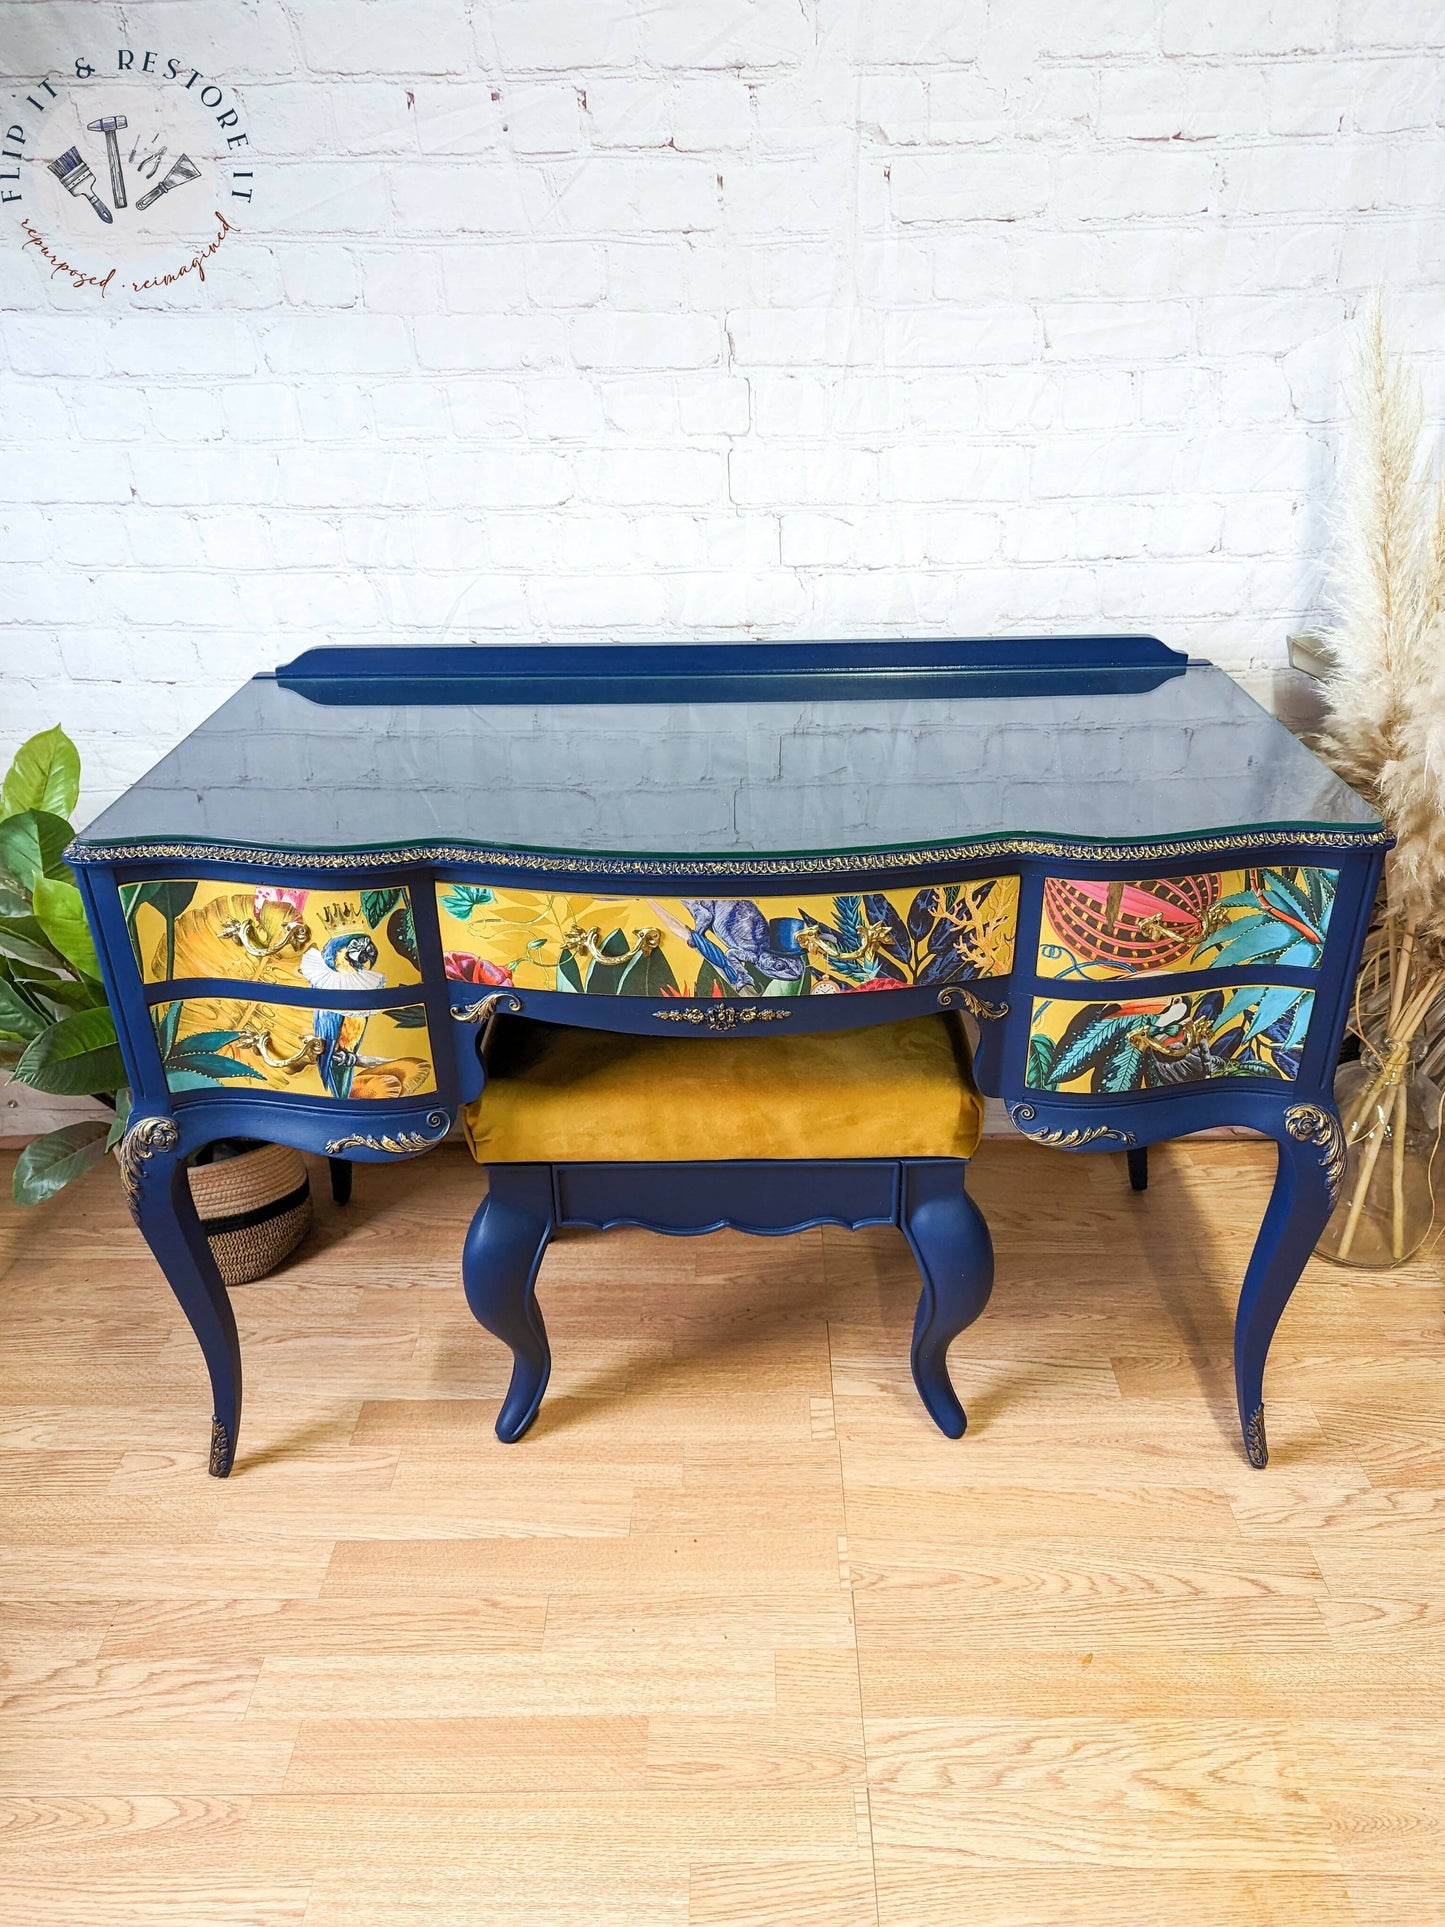 Vintage French Style Painted Bedroom Set - Dressing Table, Vanity, Desk, Sideboard and Stool, Statement, Maximalist MADE TO ORDER